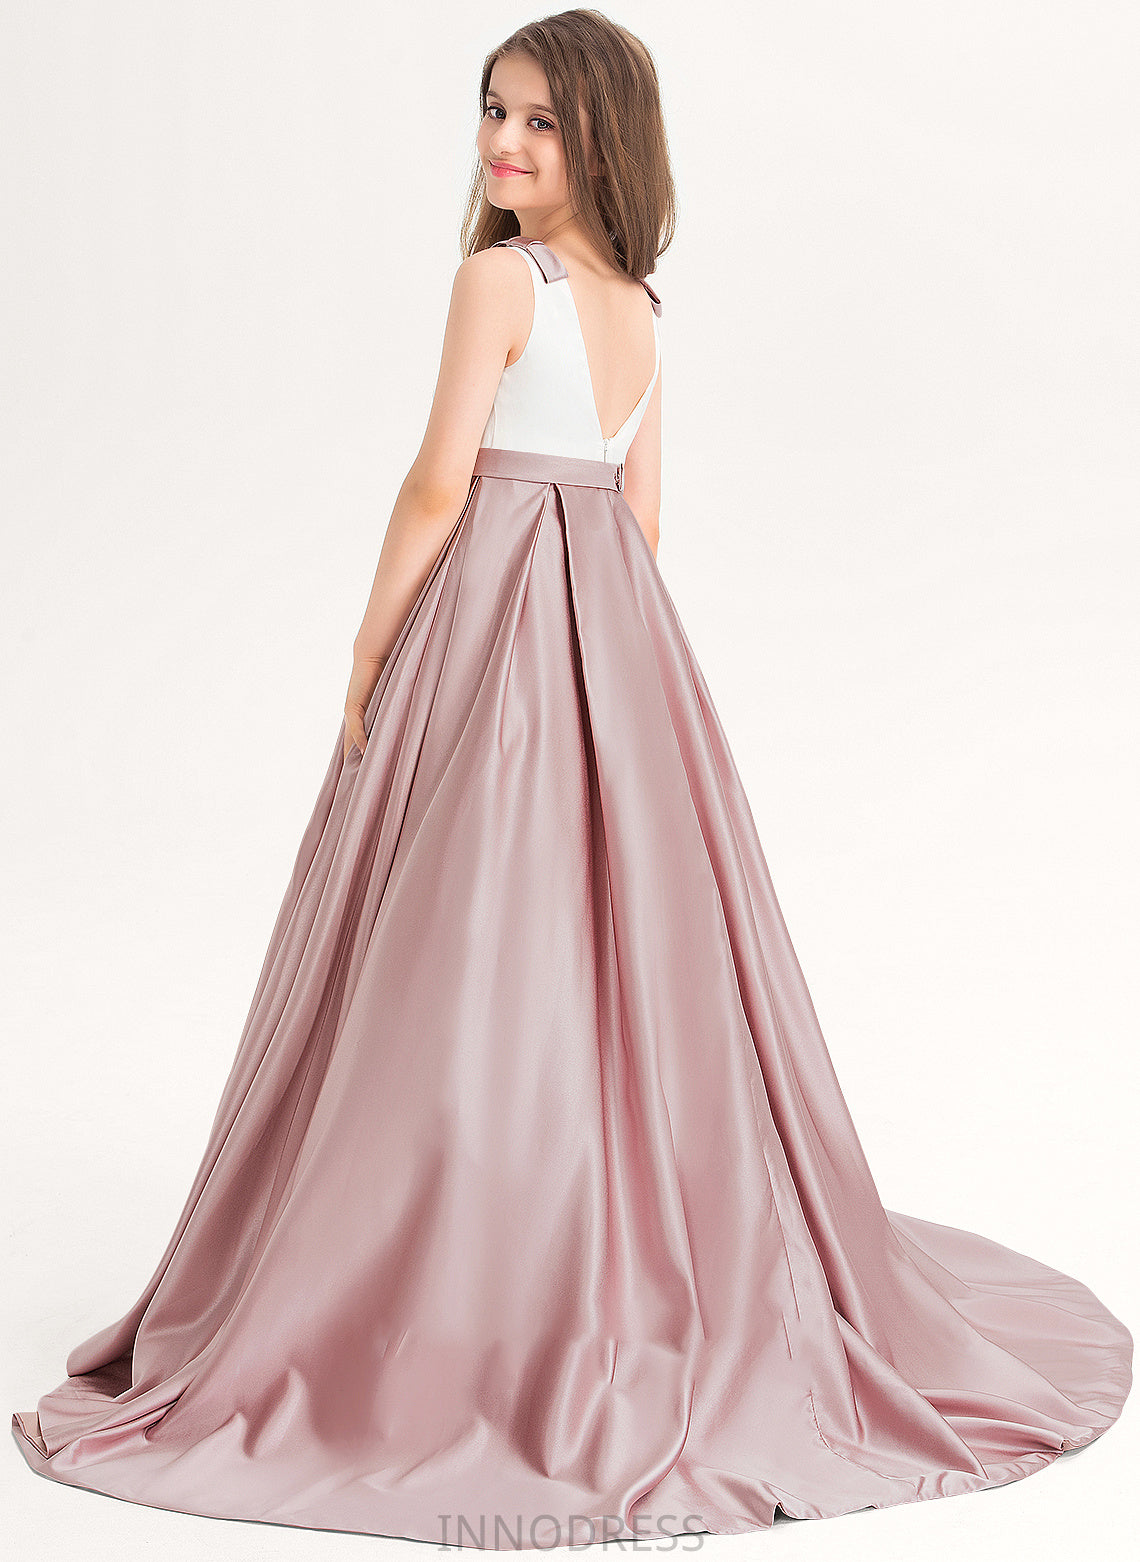 Satin With Mira Neck Scoop Bow(s) Ball-Gown/Princess Train Junior Bridesmaid Dresses Sweep Pockets